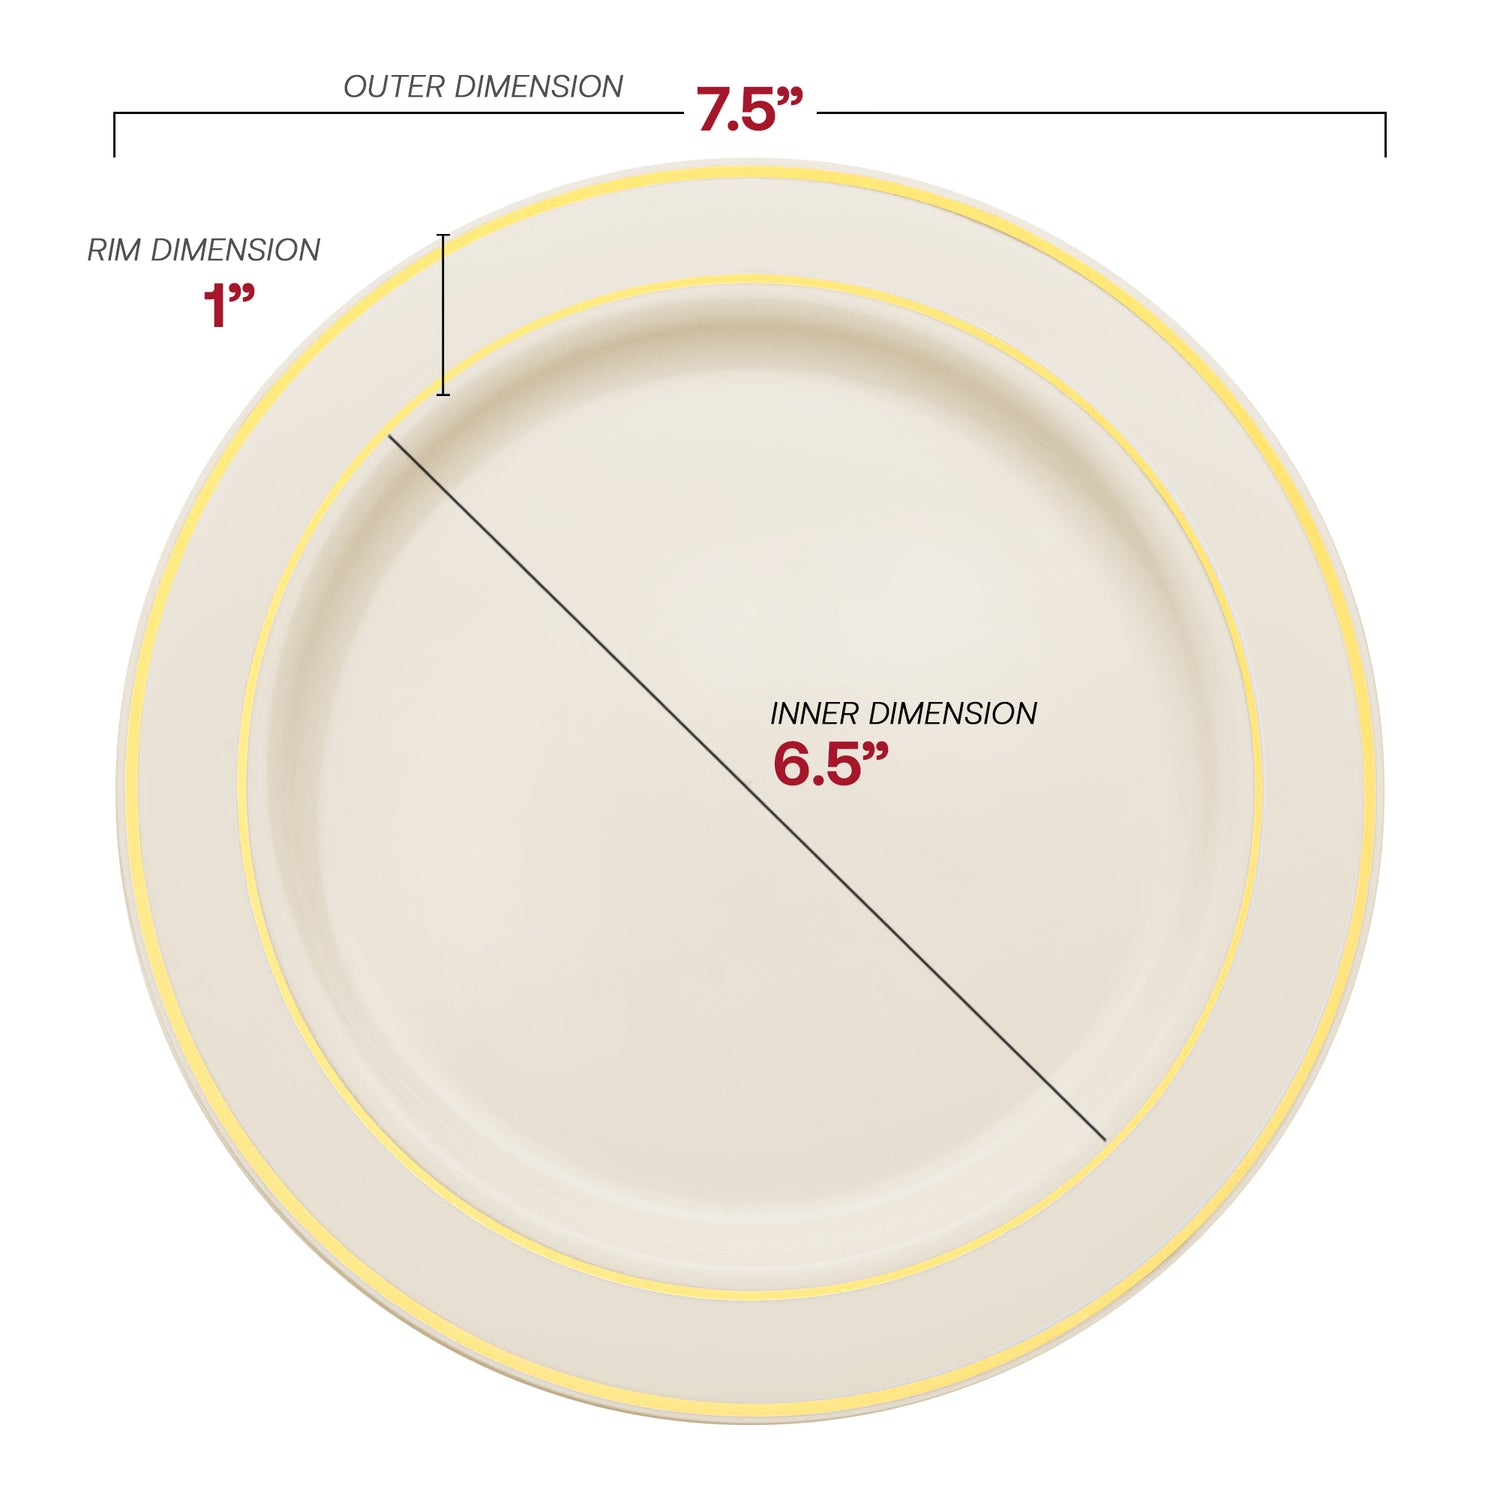 Ivory with Gold Edge Rim Plastic Appetizer/Salad Plates (7.5") Dimension | The Kaya Collection